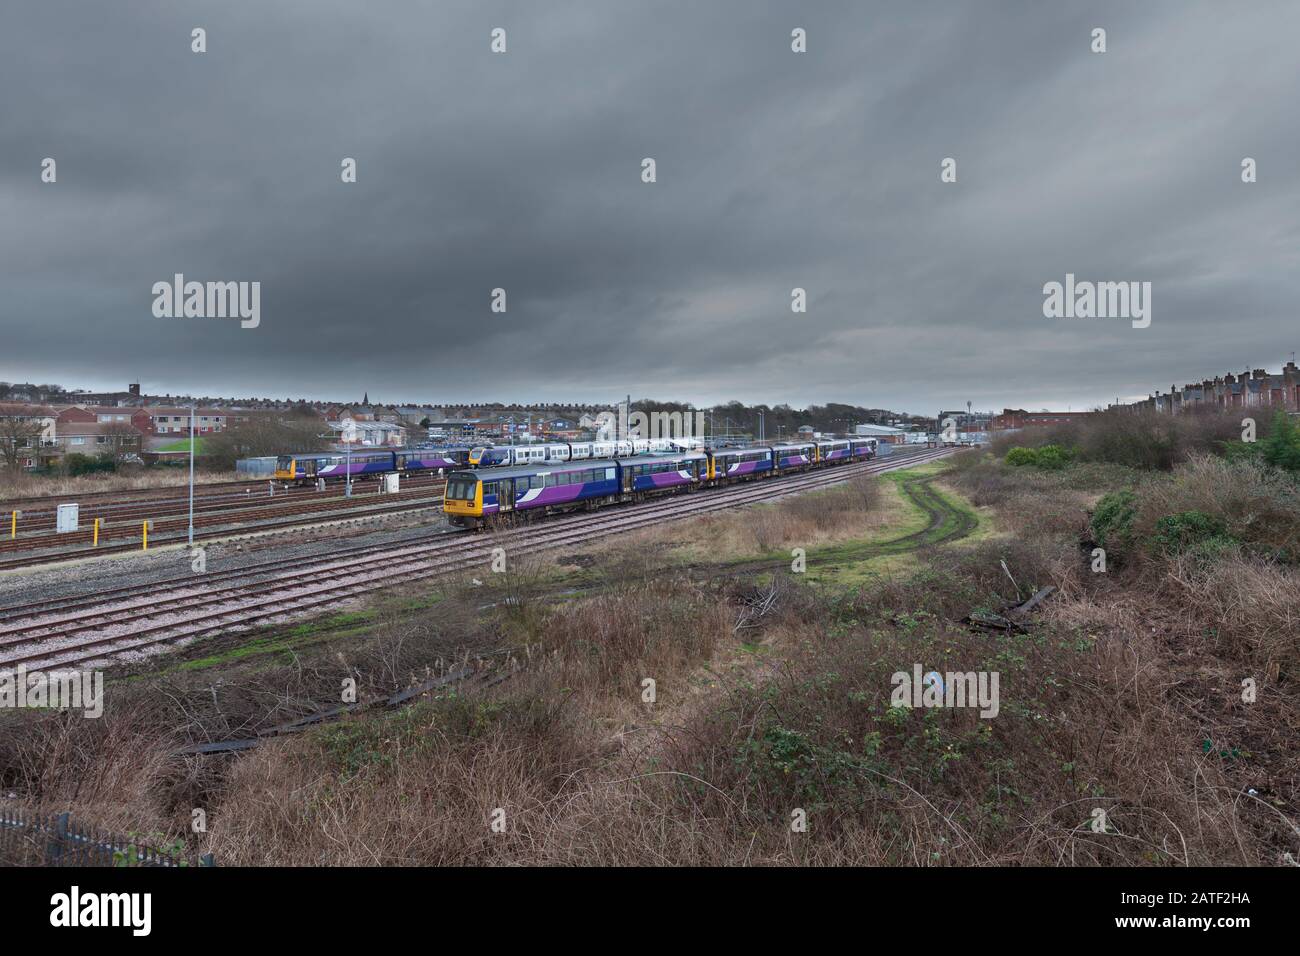 withdrawn Arriva Northern rail class 142 pacer trains stored at Barrow In Furness carriage sidings awaiting scrapping. Stock Photo